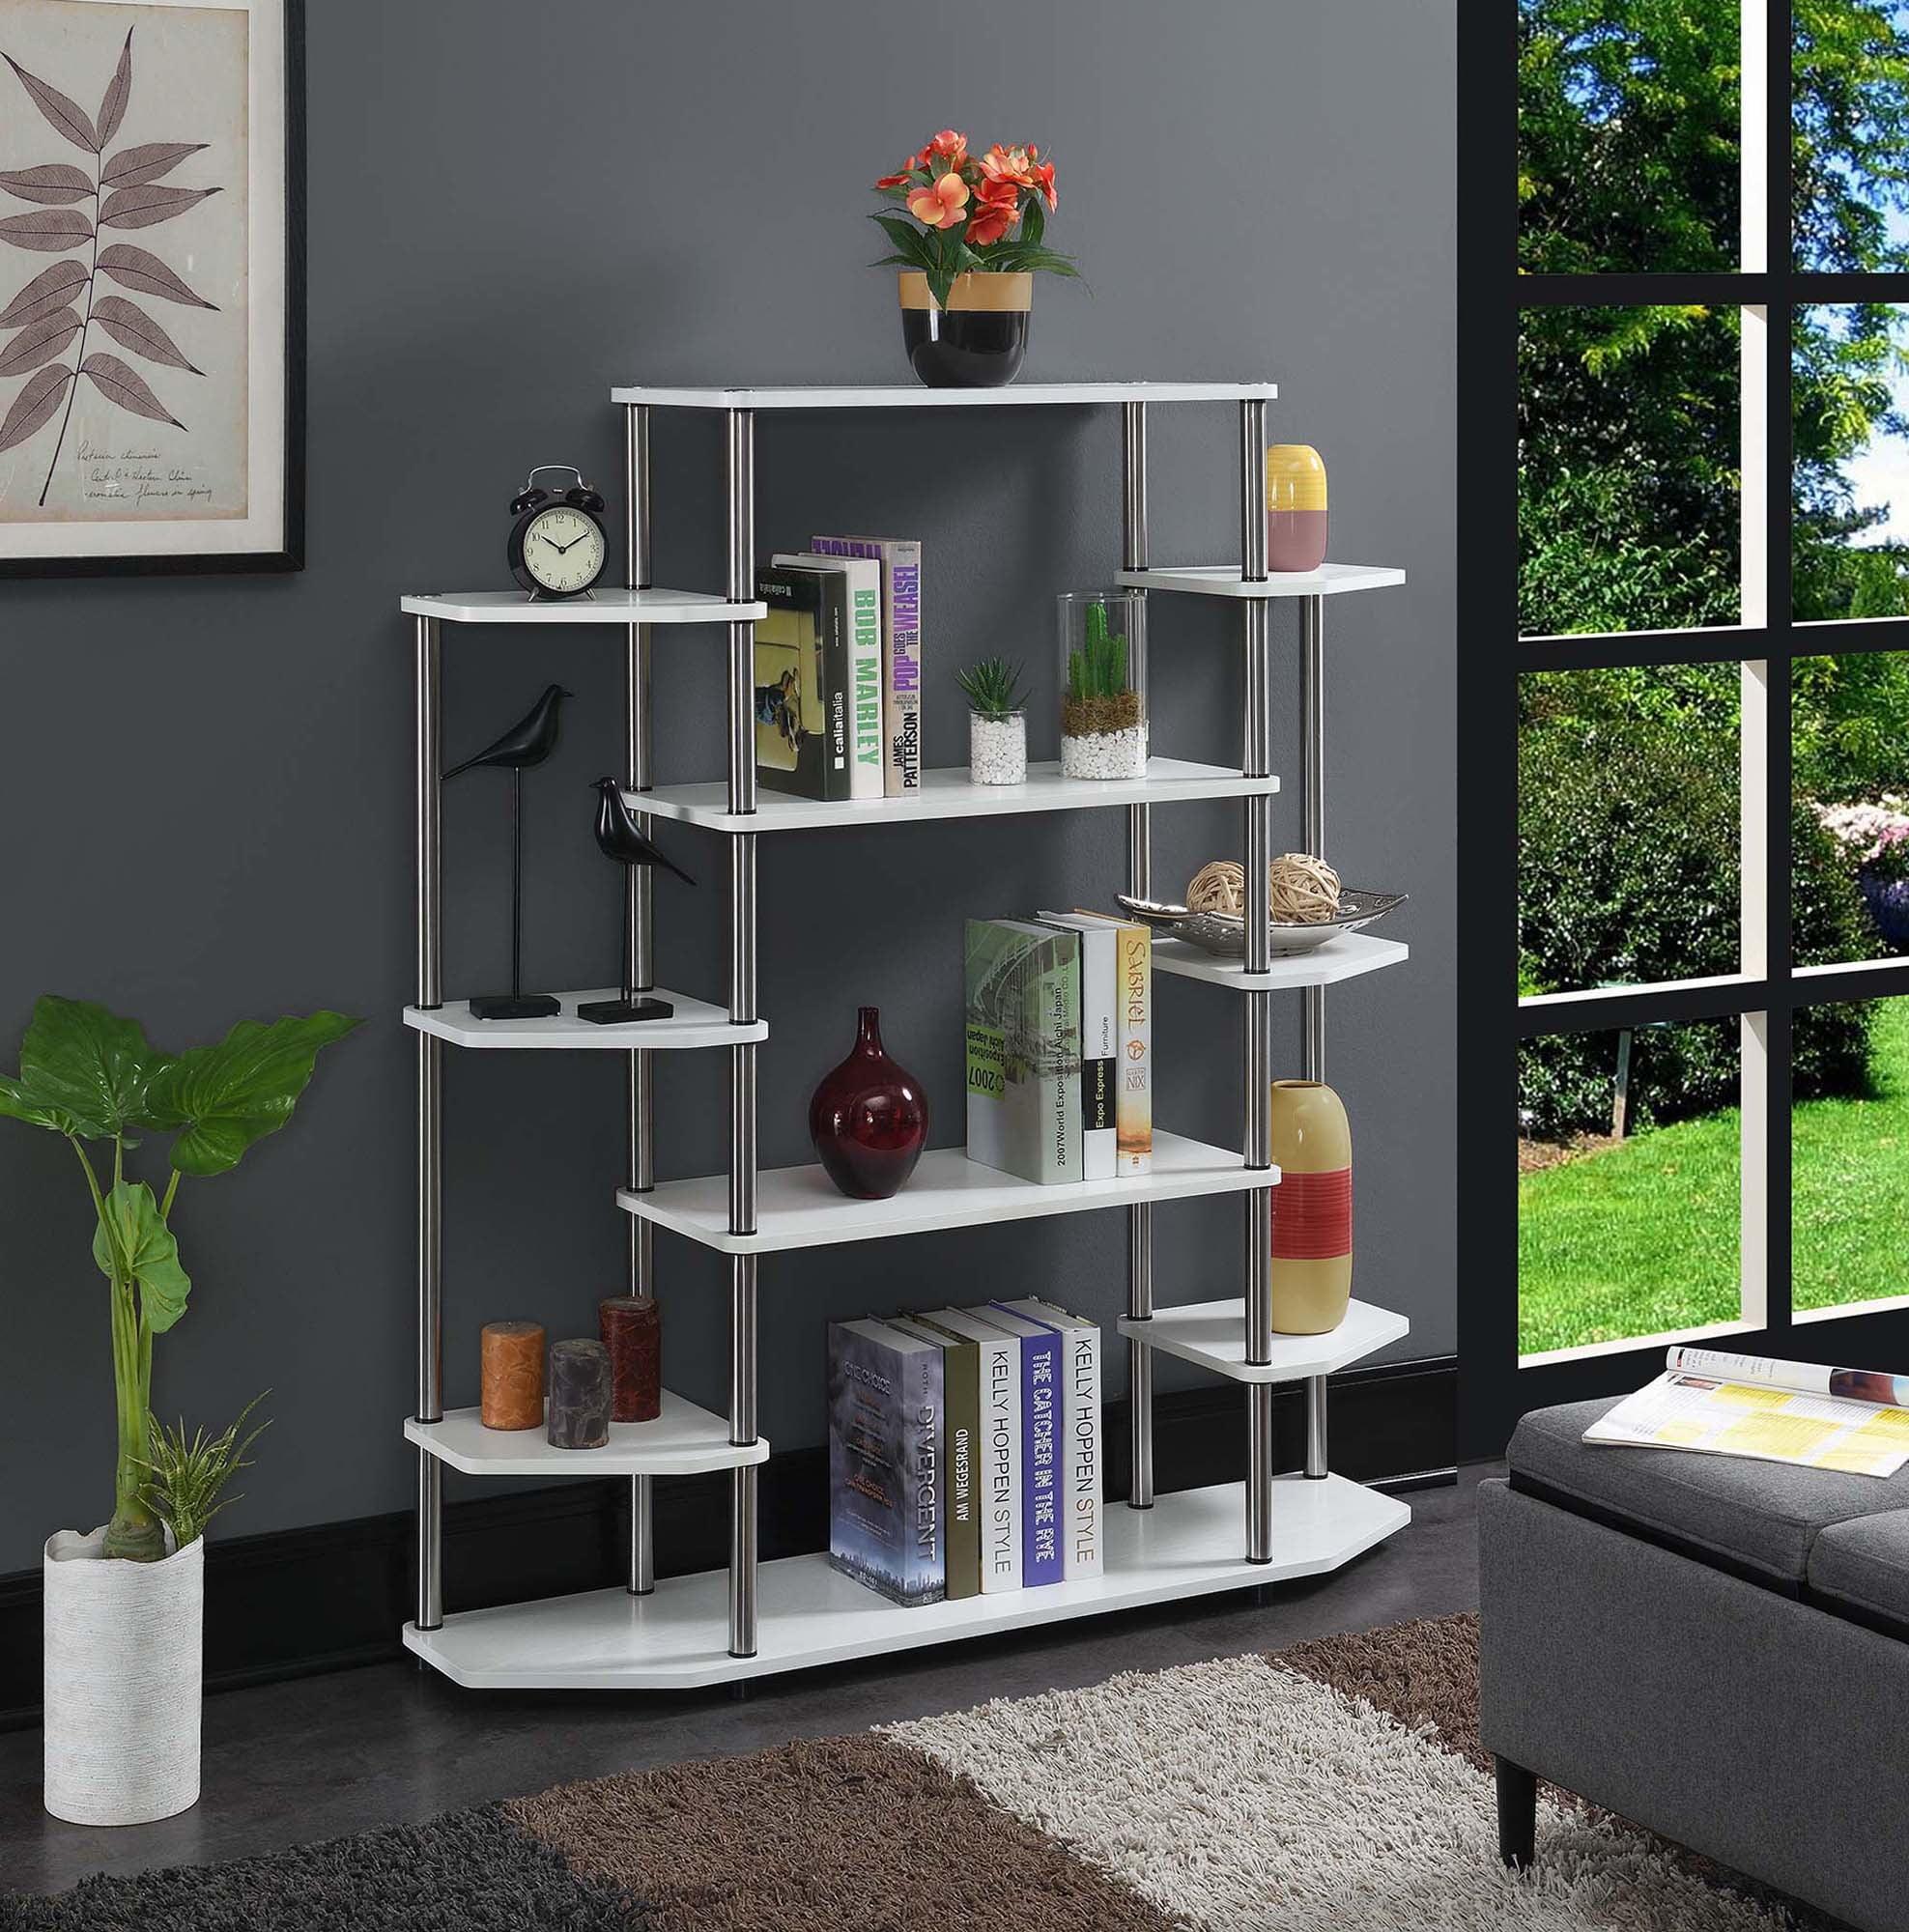 Modern White Wood Wall Unit Bookshelf with Stainless Steel Legs